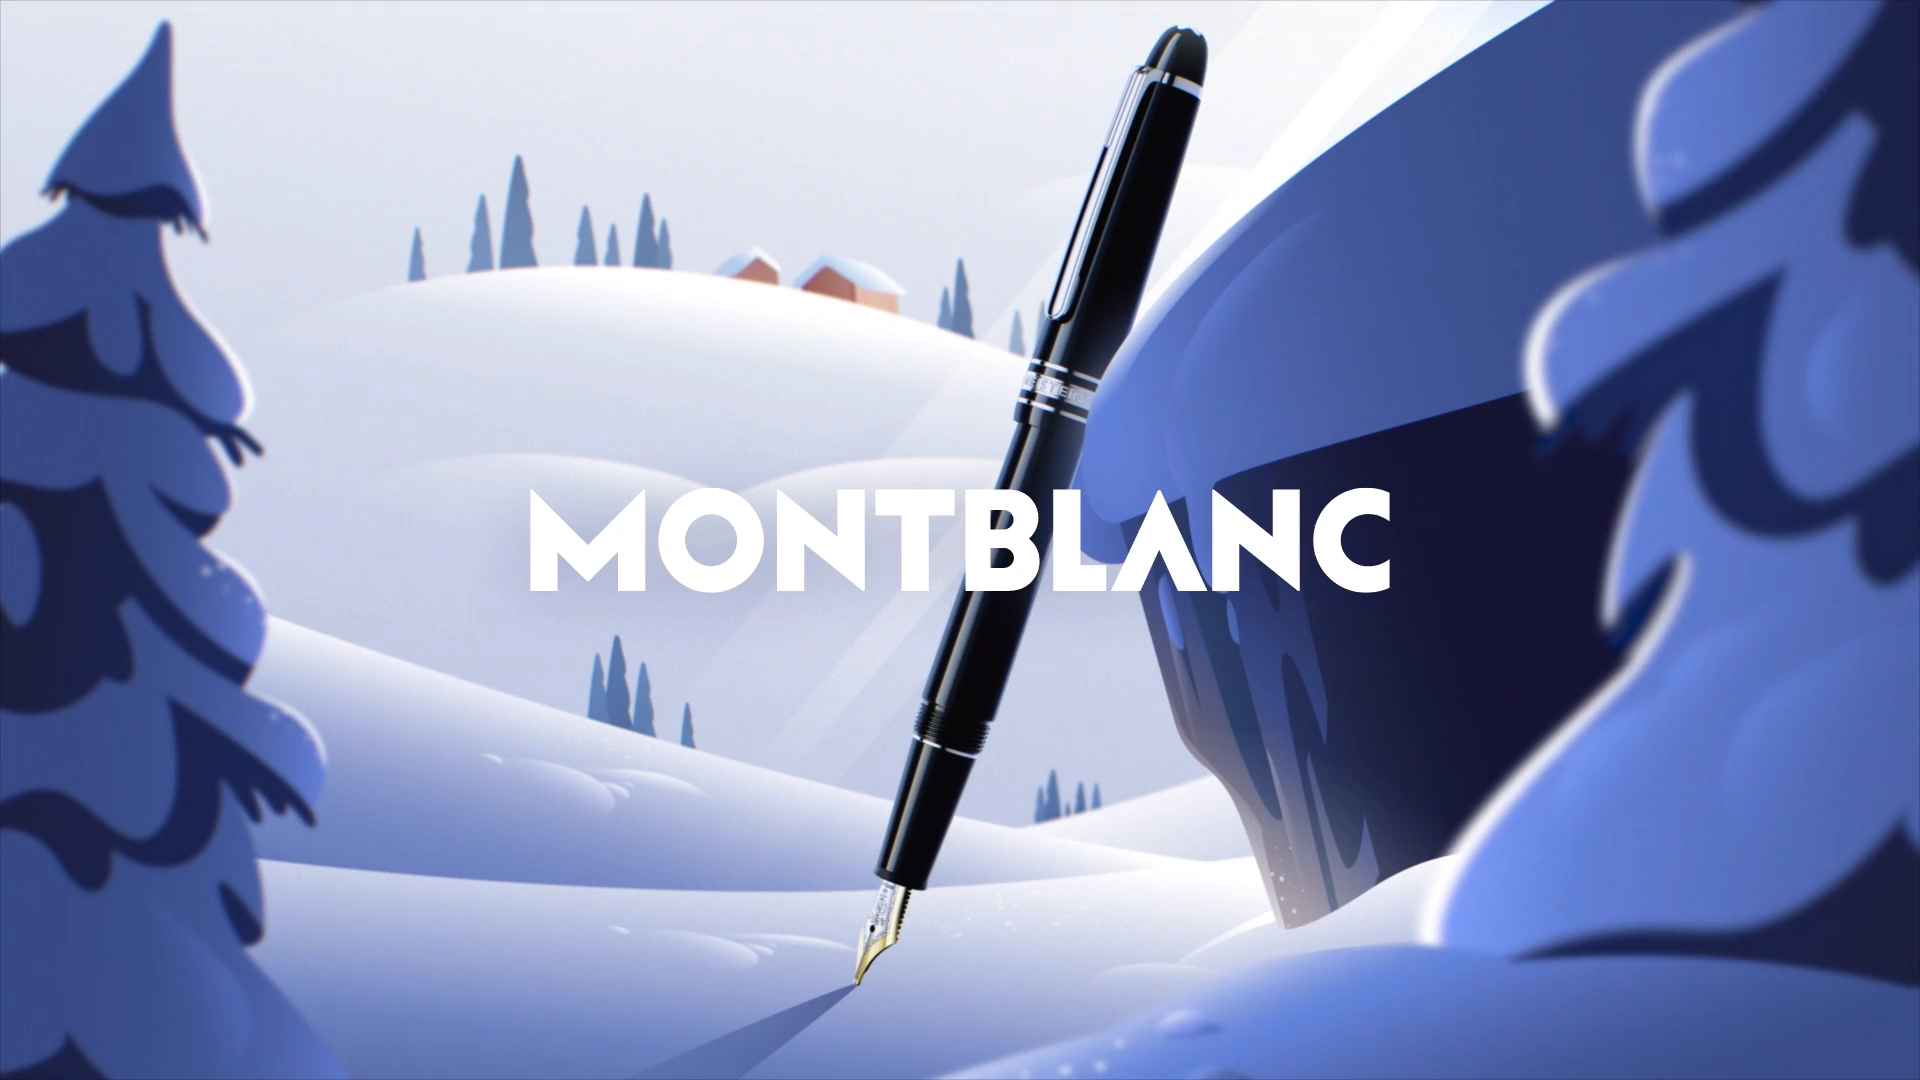 
            Client: Montblanc;
            Project: Happy Holidays Campaign 2022;
            Production Company: The Marmalade;
            Producing: Max Boehlen; 
            Creative Direction: Daniel Göttling;
            Art Direction: Katerina Schönfeld; 
            Visual Development: Markus Wagner; 
            Storyboard Illustration: Jörn Peper; 
            Illustration: Adrian Fernandez; 
            Animation & additional Illustration: 
            Markus Wagner, Roald Seeliger, Katerina Schönfeld; 
            Additional character animation: Philipp Kehl, Martin Lorenz;
            3D: Hannes Rumig, Ursula Prieto, Dion Borutzky;
            Compositing: Babette Kahn;
            Sounddesign: Kay Peters;
            ;
            
            I was tasked with processing the delivered CAD data, modeling, shading, and lighting, culminating in the rewarding opportunity to render the iconic Montblanc pen.